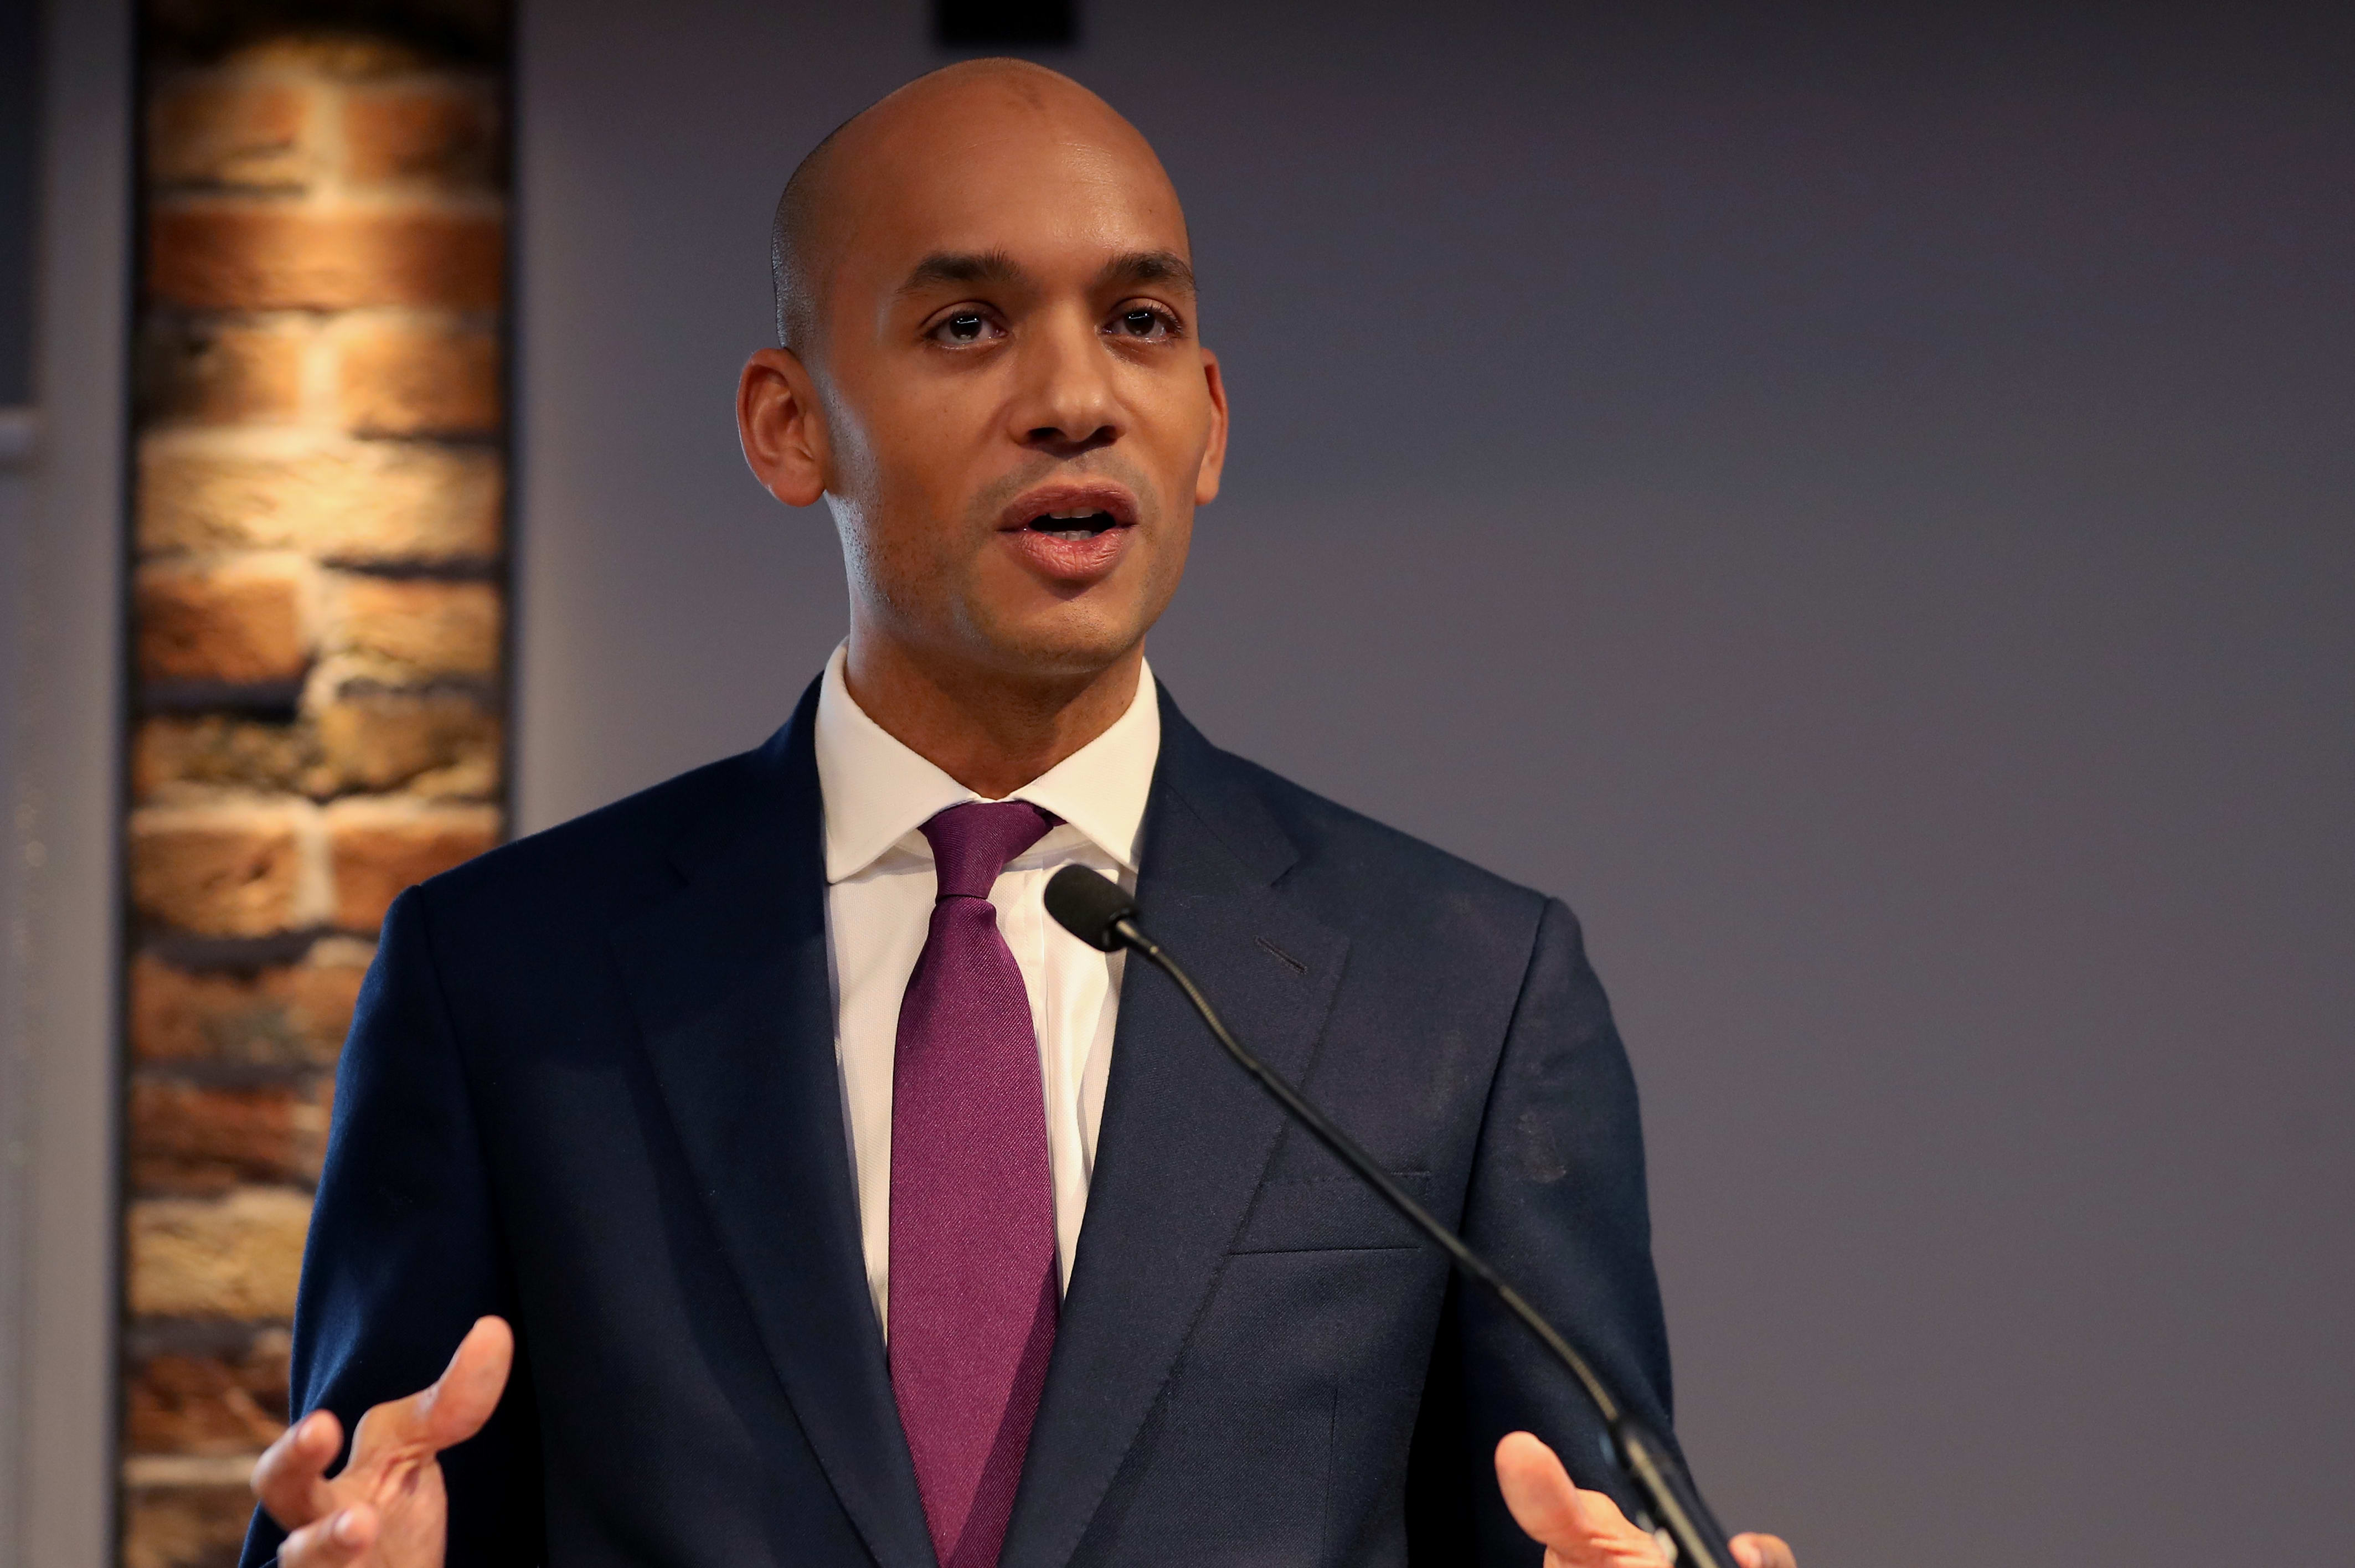 Former Labour party MP Chuka Umunna speaks during a press conference in London on February 18, 2019, where he and colleagues announced their resignation from the Labour Party, and the formation of a new independent group of MPs.